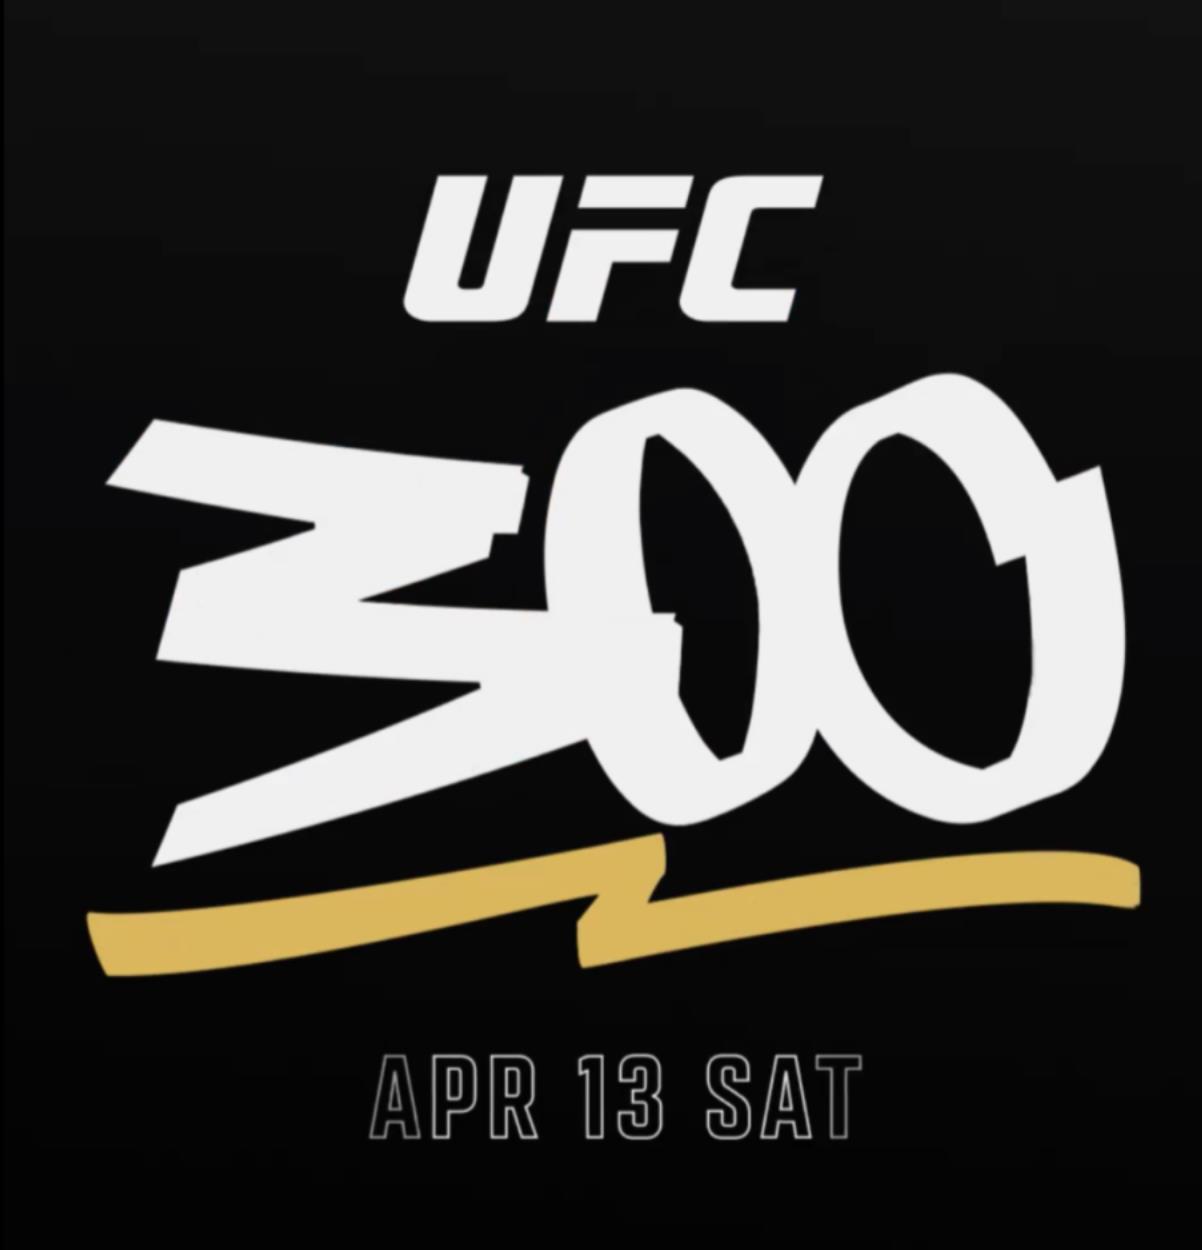 Champ waits to fight bitter rival in historic UFC 300 match